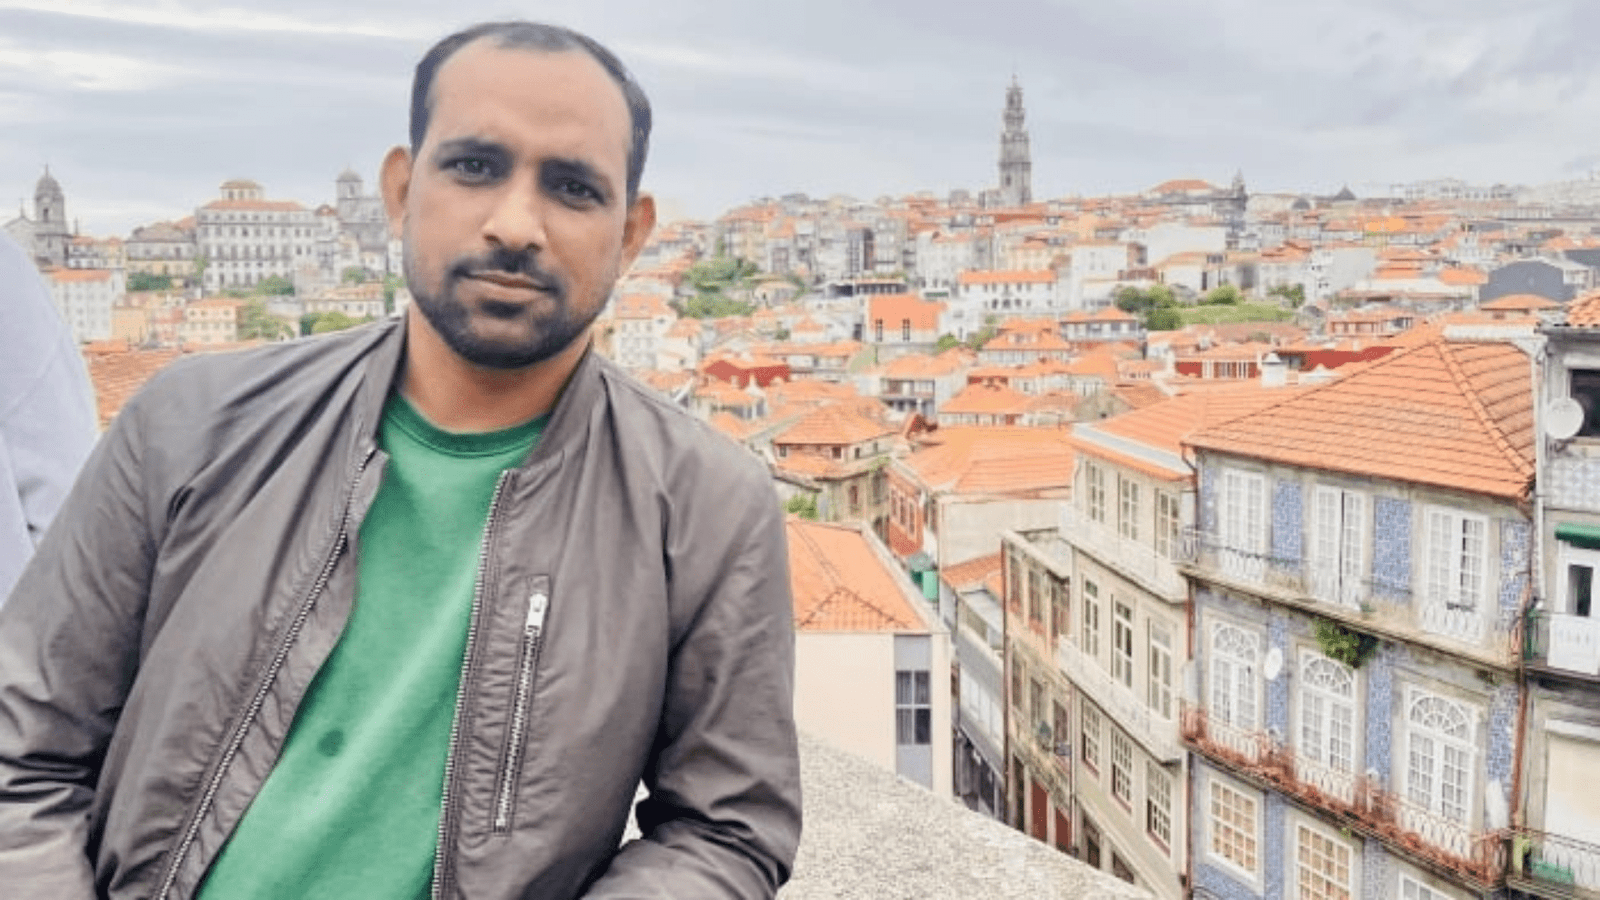 Pakistani researcher killed in Portugal, resisting robbery